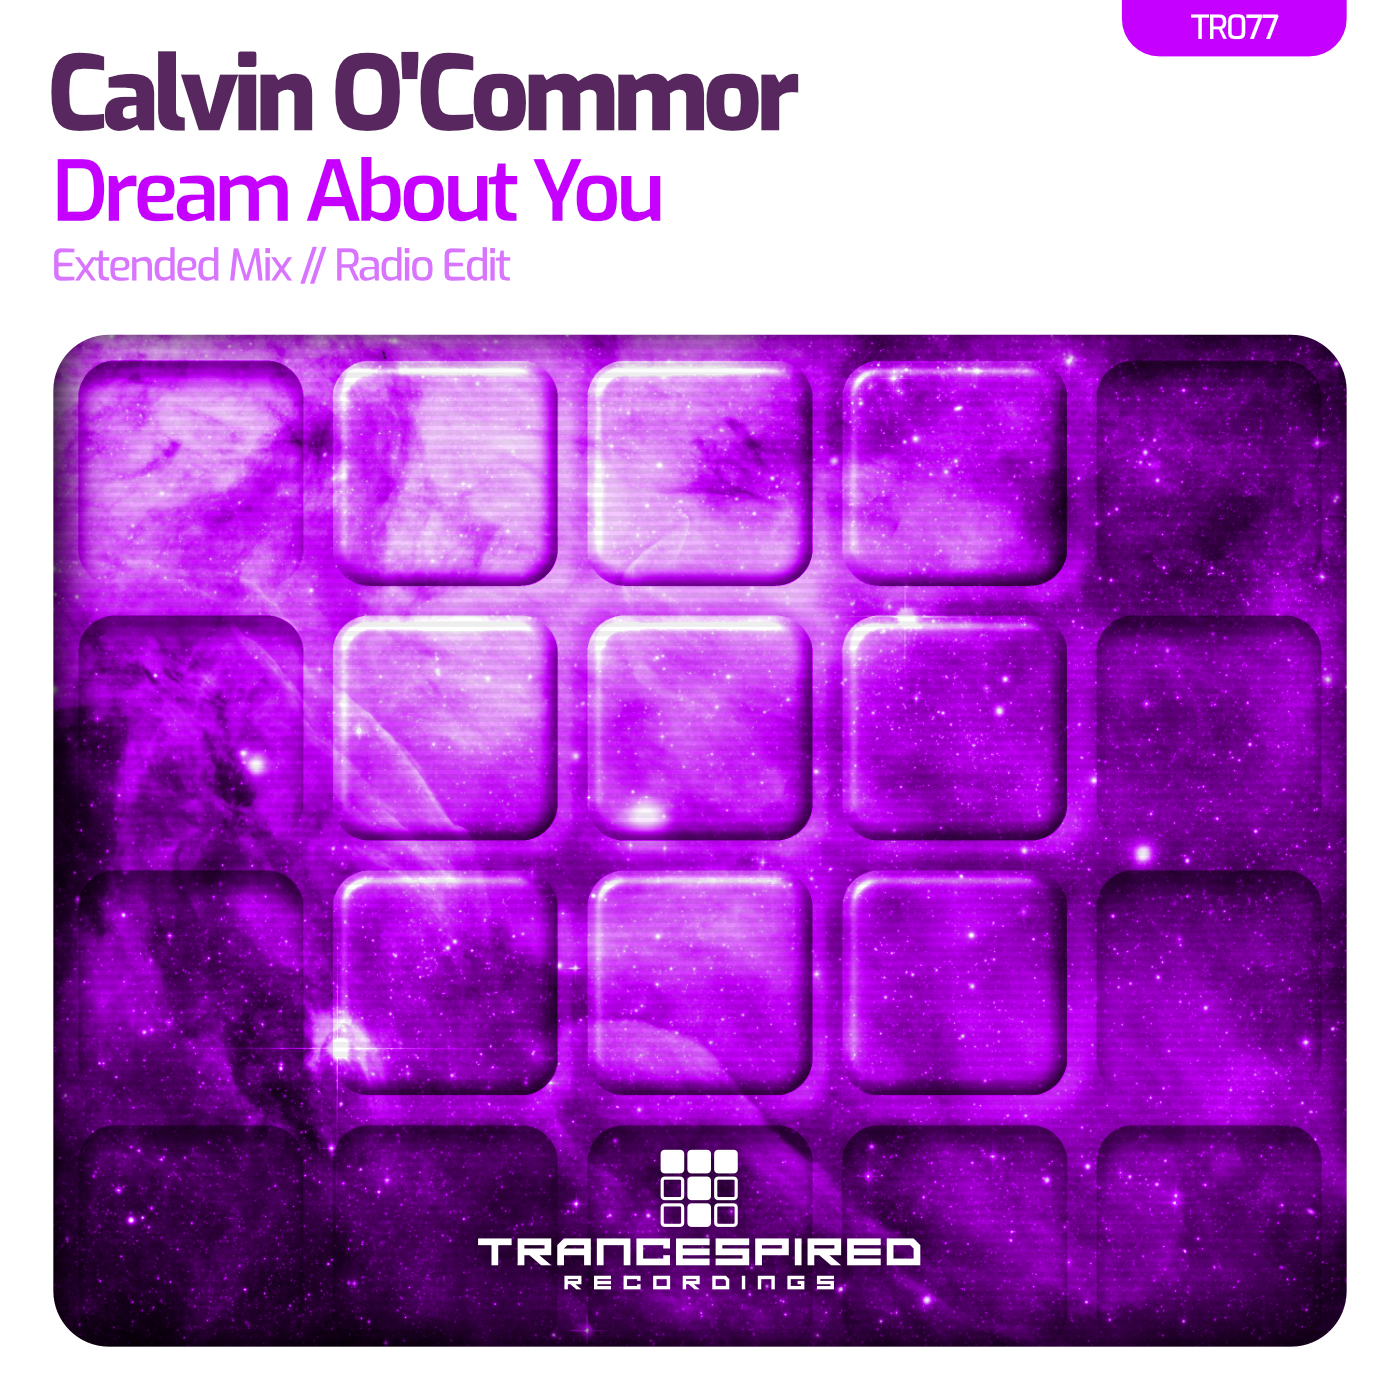 Calvin O'Commor presents Dream About You on Trancespired Recordings